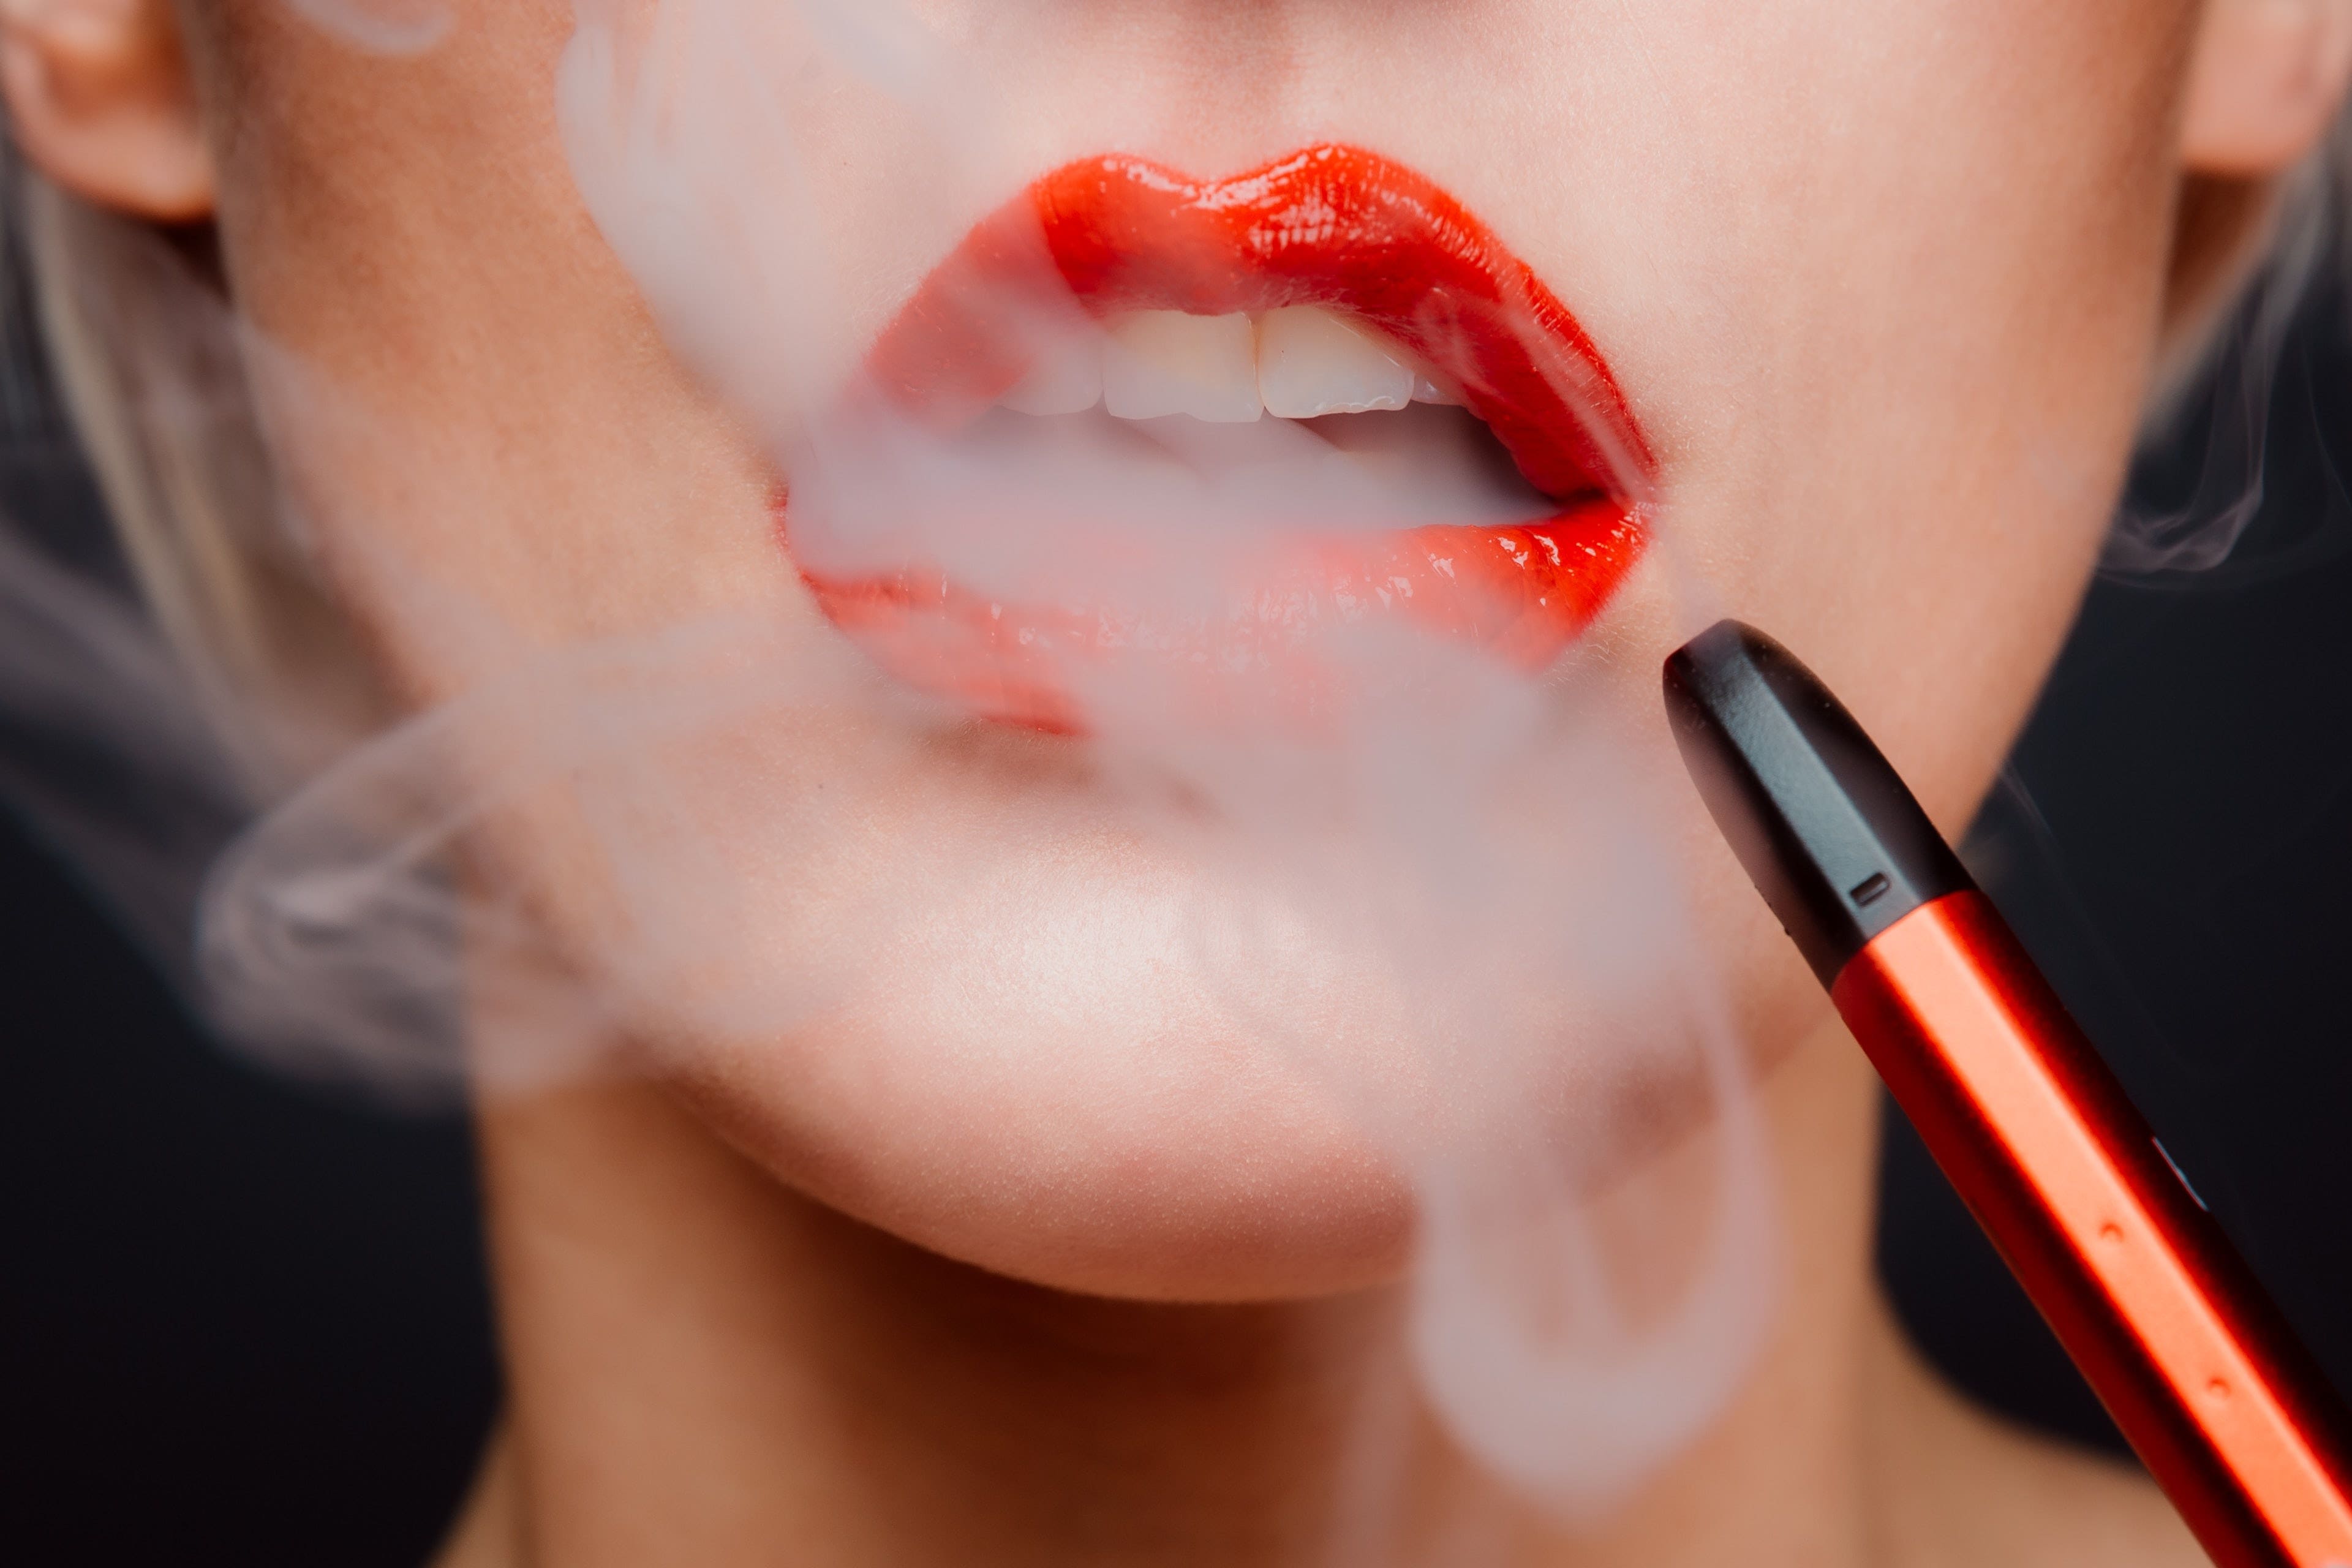 Vaping Companies Are Thumbing Their Noses At FDA Rules And Getting Away With It